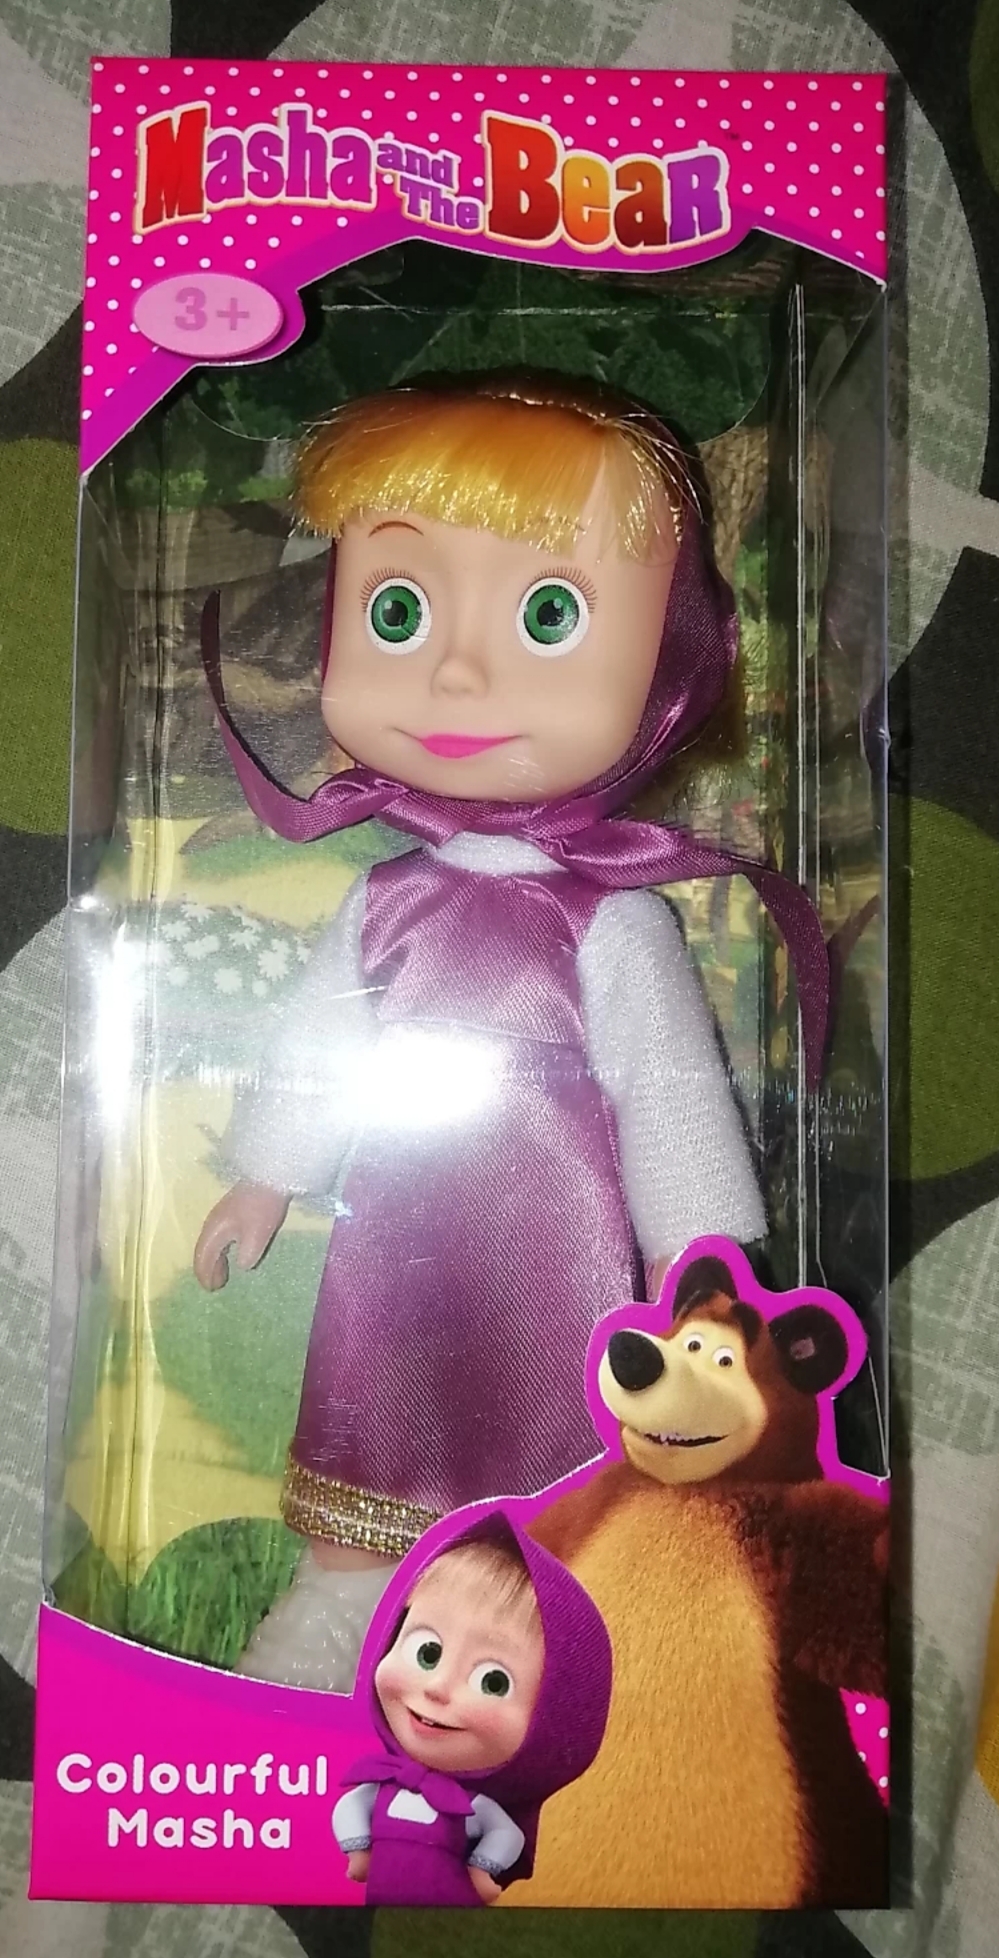 Masha And The Bear Masha Figure Reviews Features Price Buy Online 